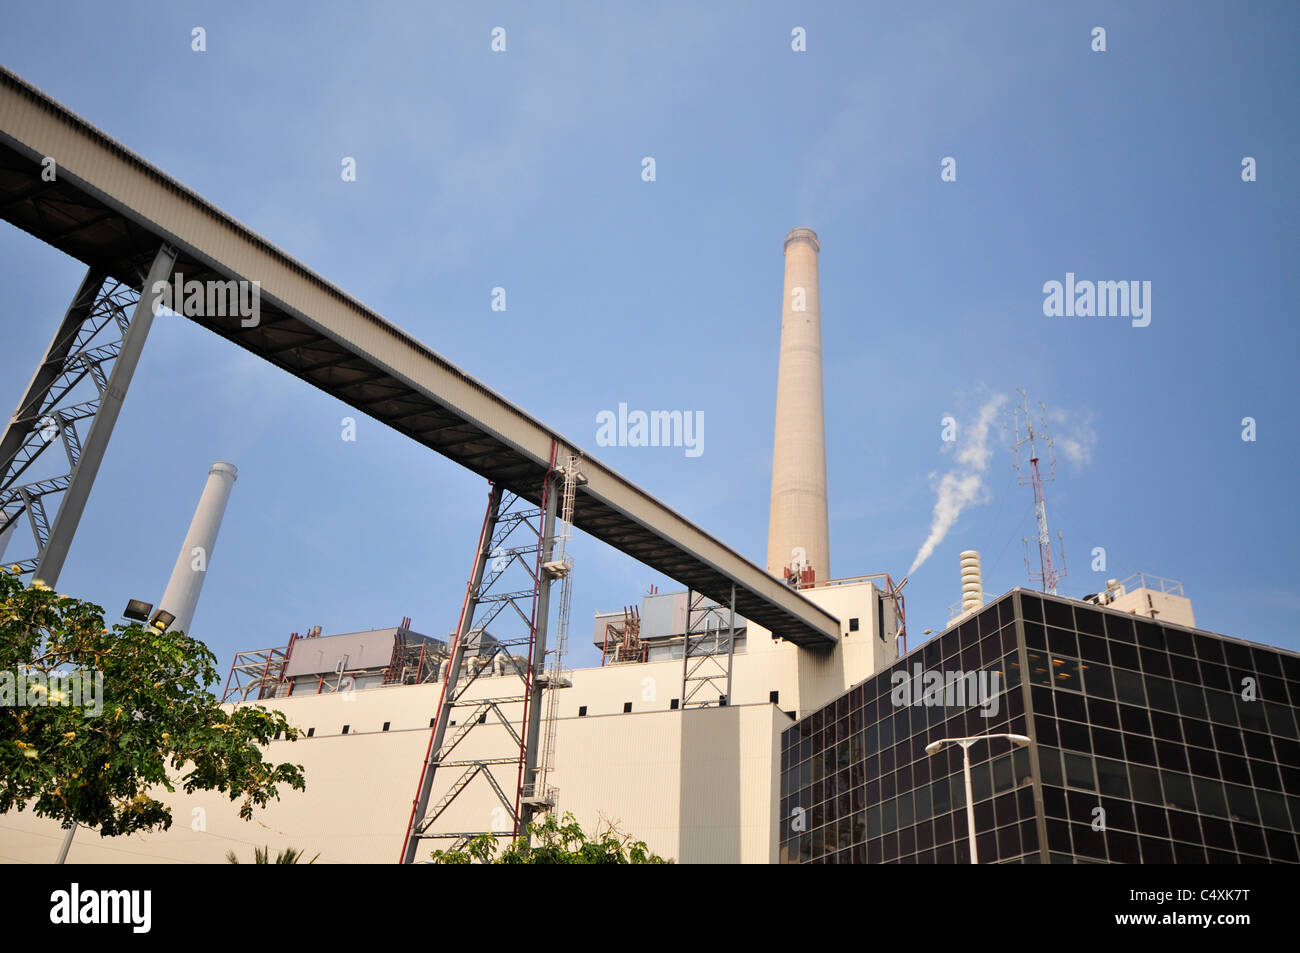 Israel, Hadera, The Orot Rabin coal operated power plant Photographed from within the facility Stock Photo